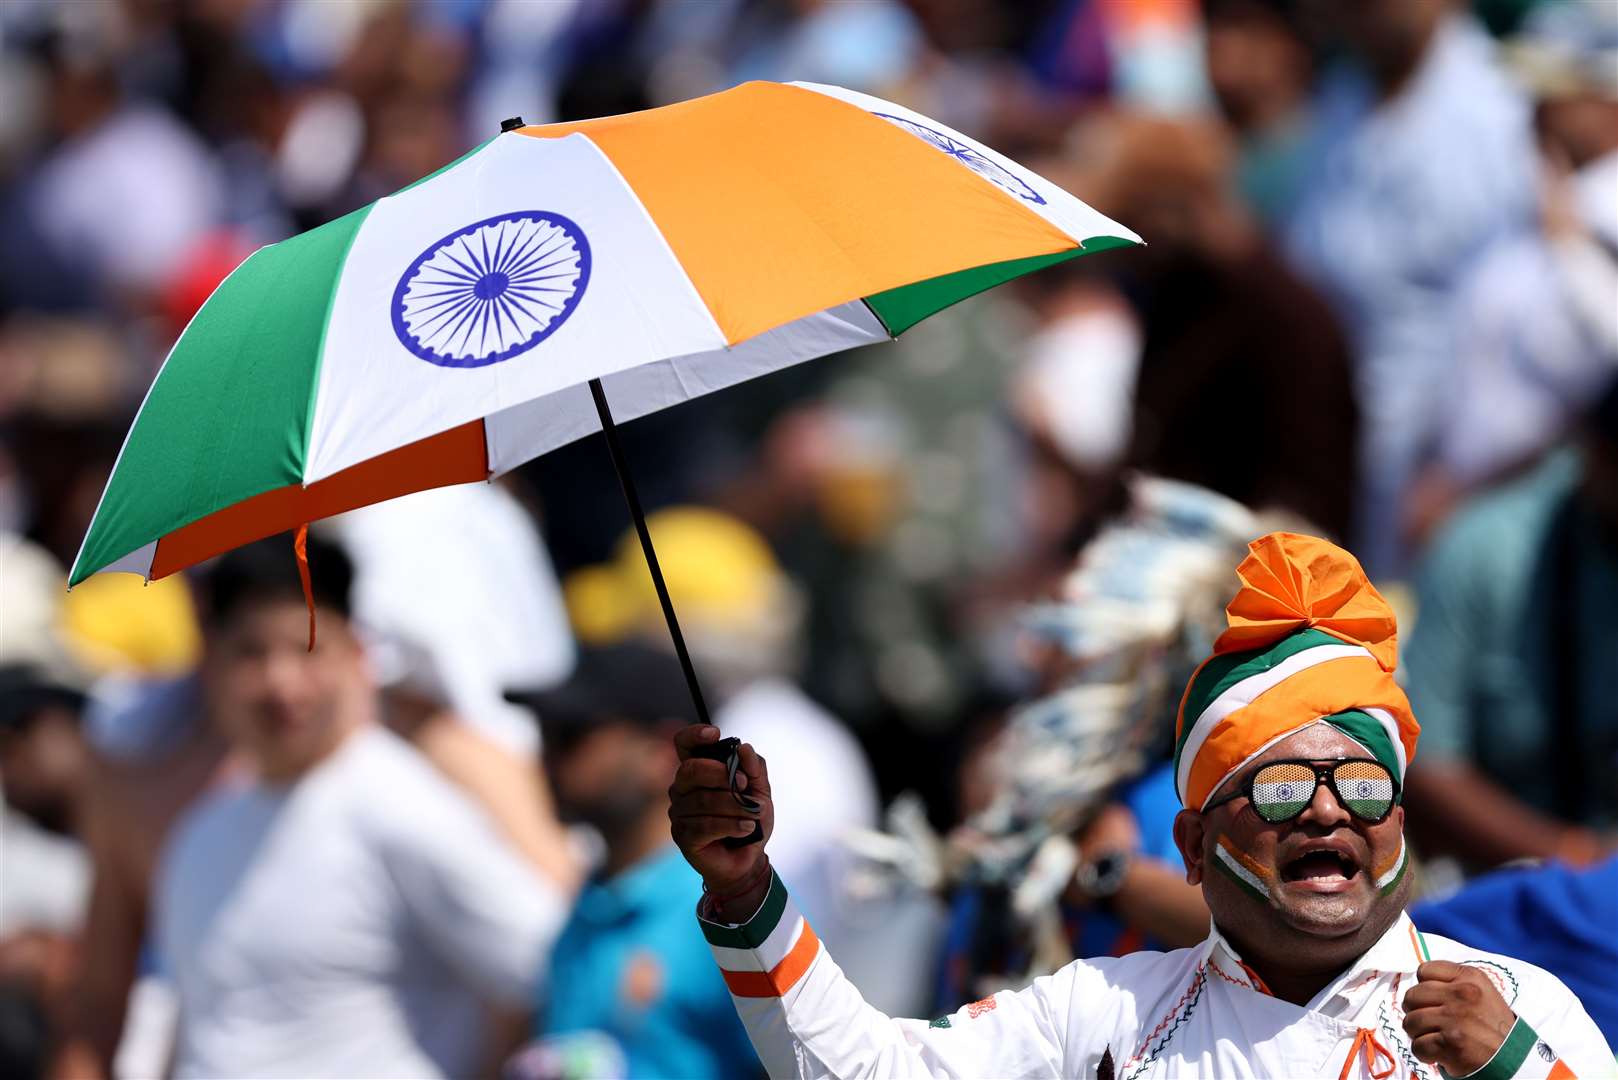 India fans came well prepared in the stands during day four of the ICC World Test Championship Final match at The Oval against Australia (Steven Paston/PA)